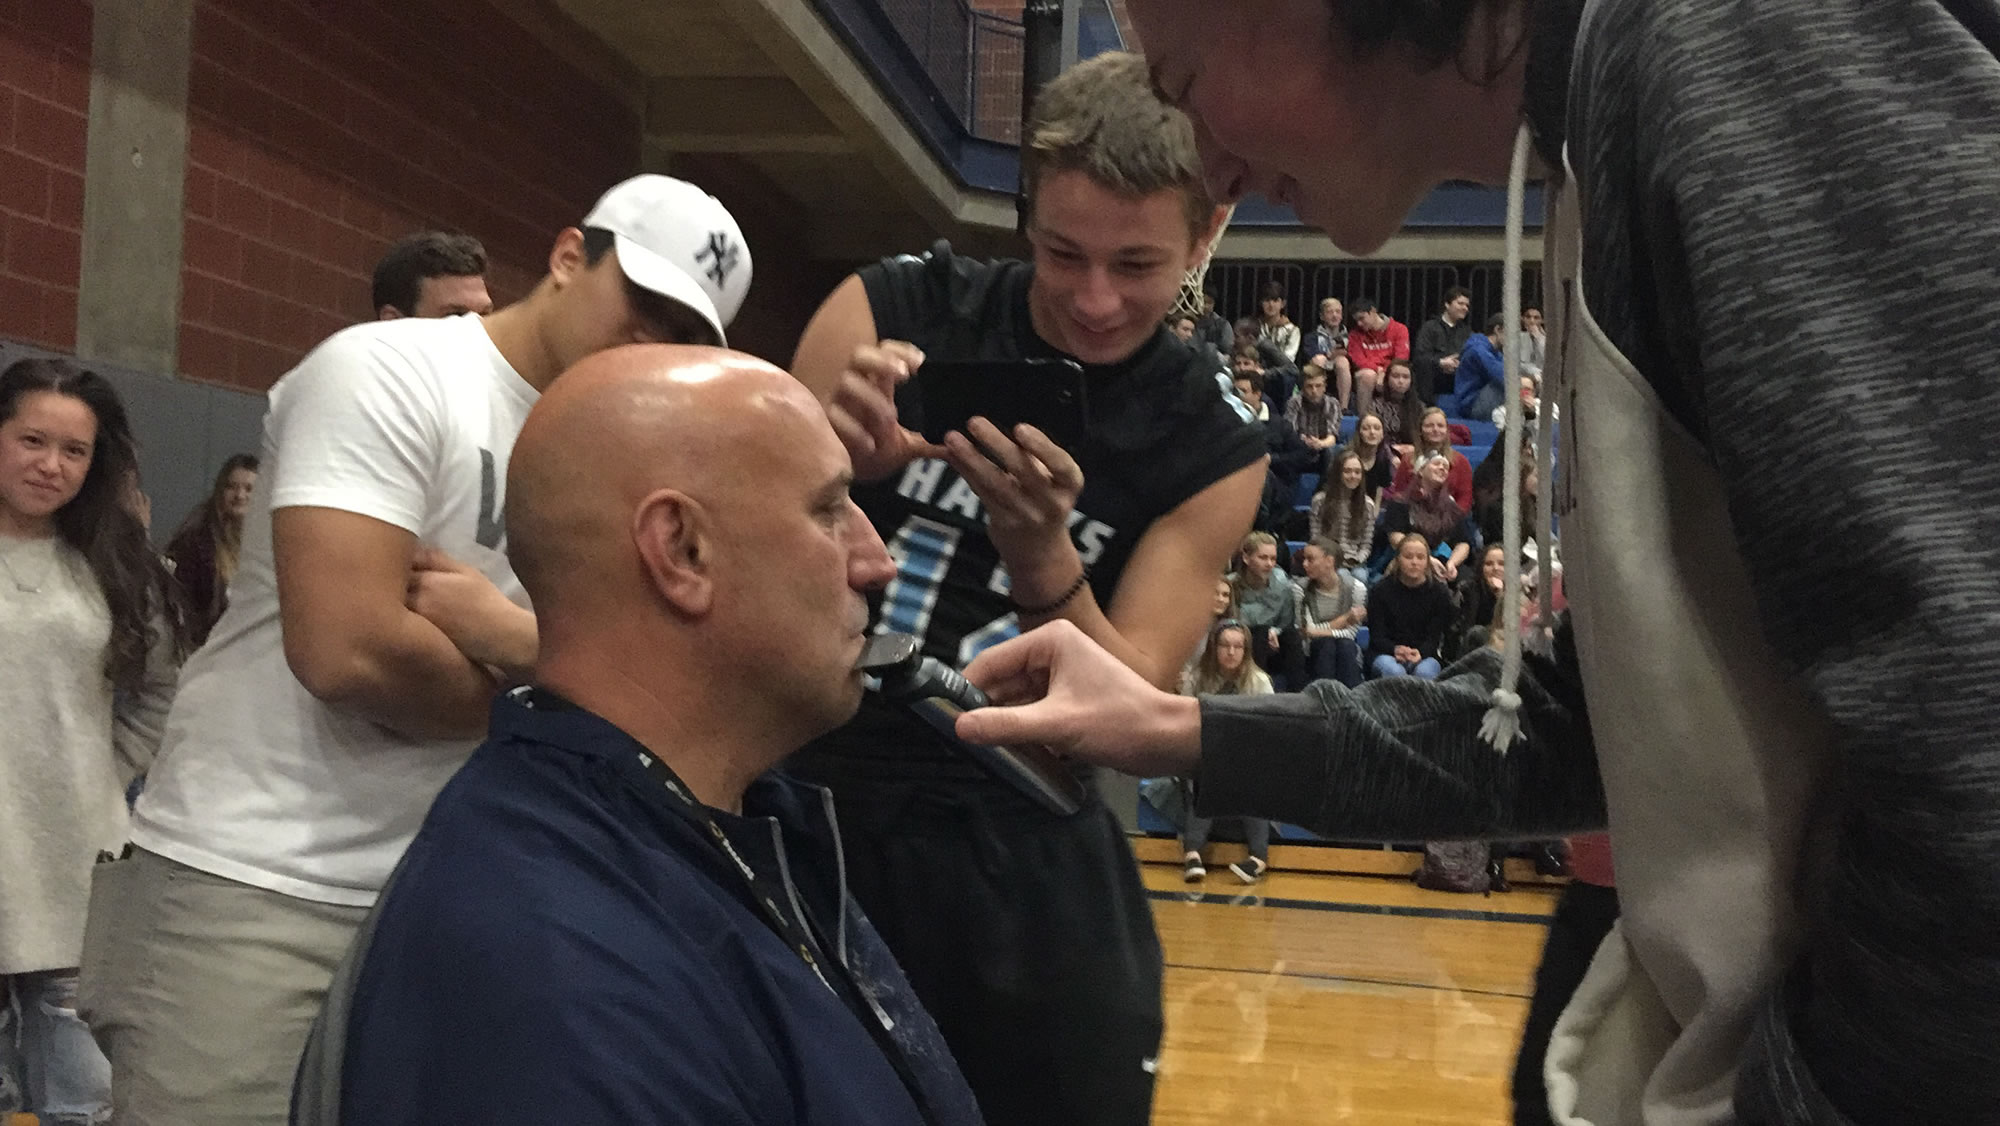 Hockinson football coach Rick Steele, as a part of a bet, had his mustache shaved by his players after they presented the state championship trophy to the high school on Friday, December 15.